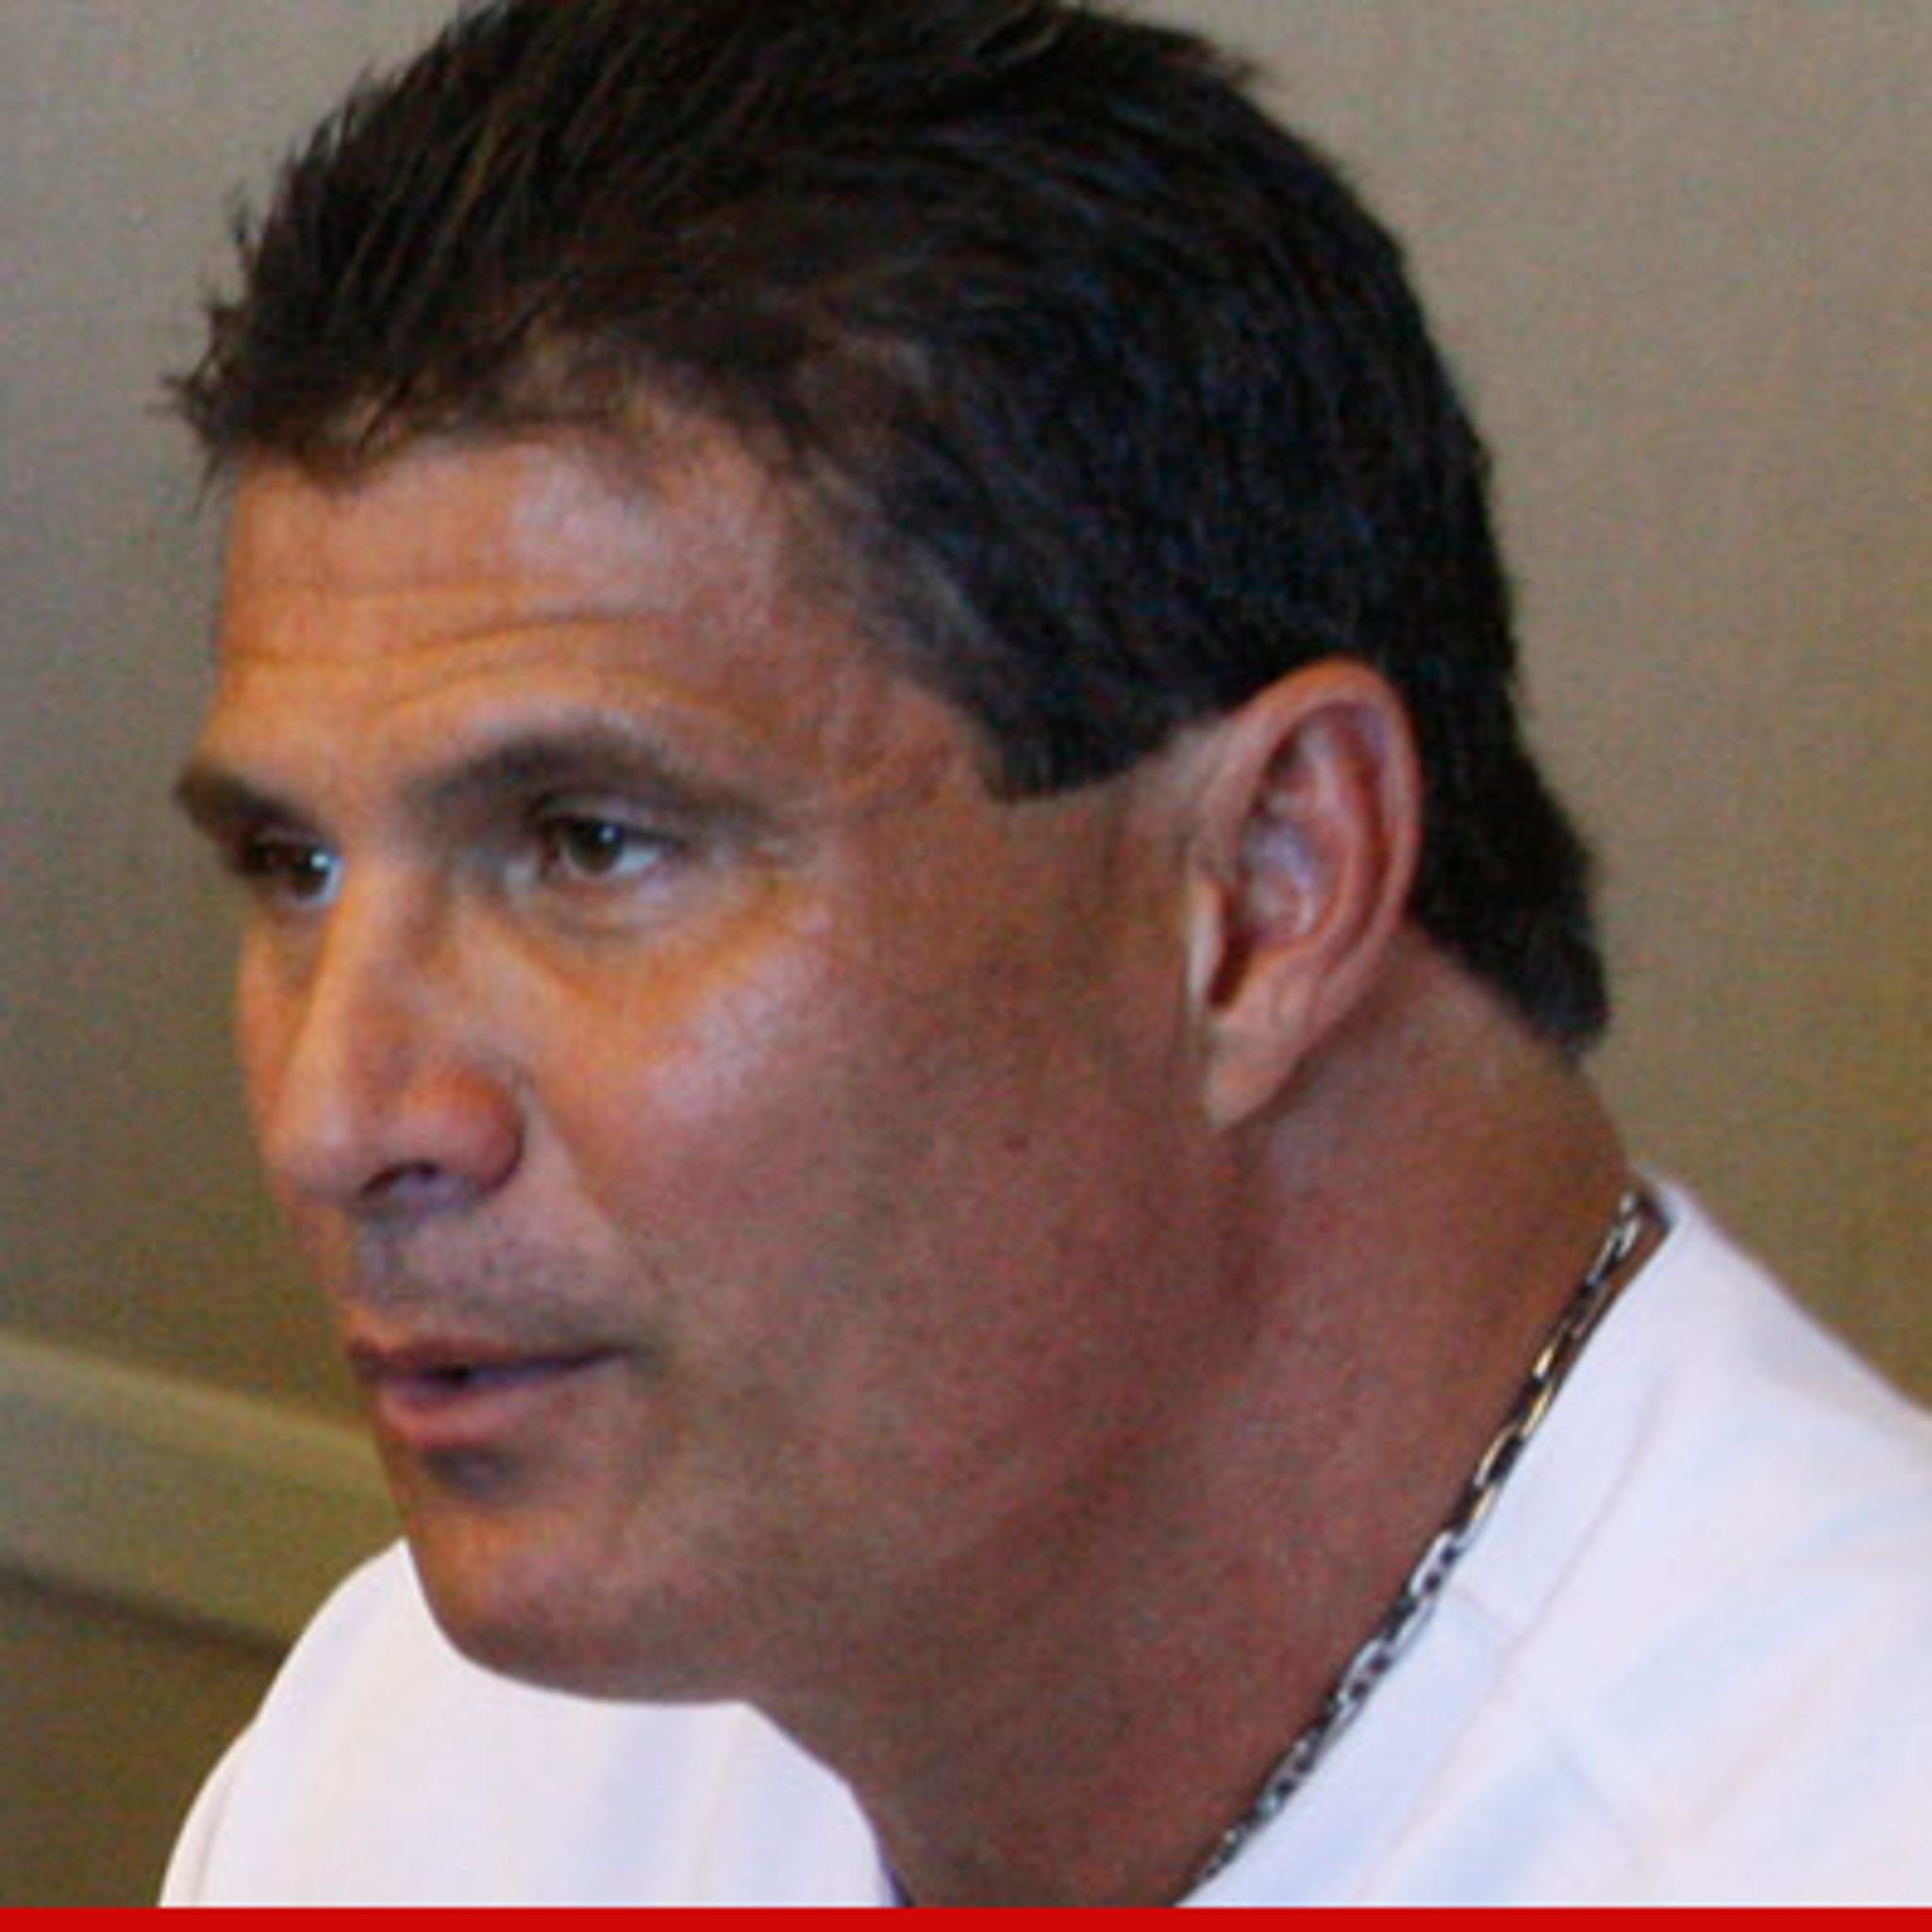 Jose Canseco Accidentally Shoots Himself in Hand – The Hollywood Reporter